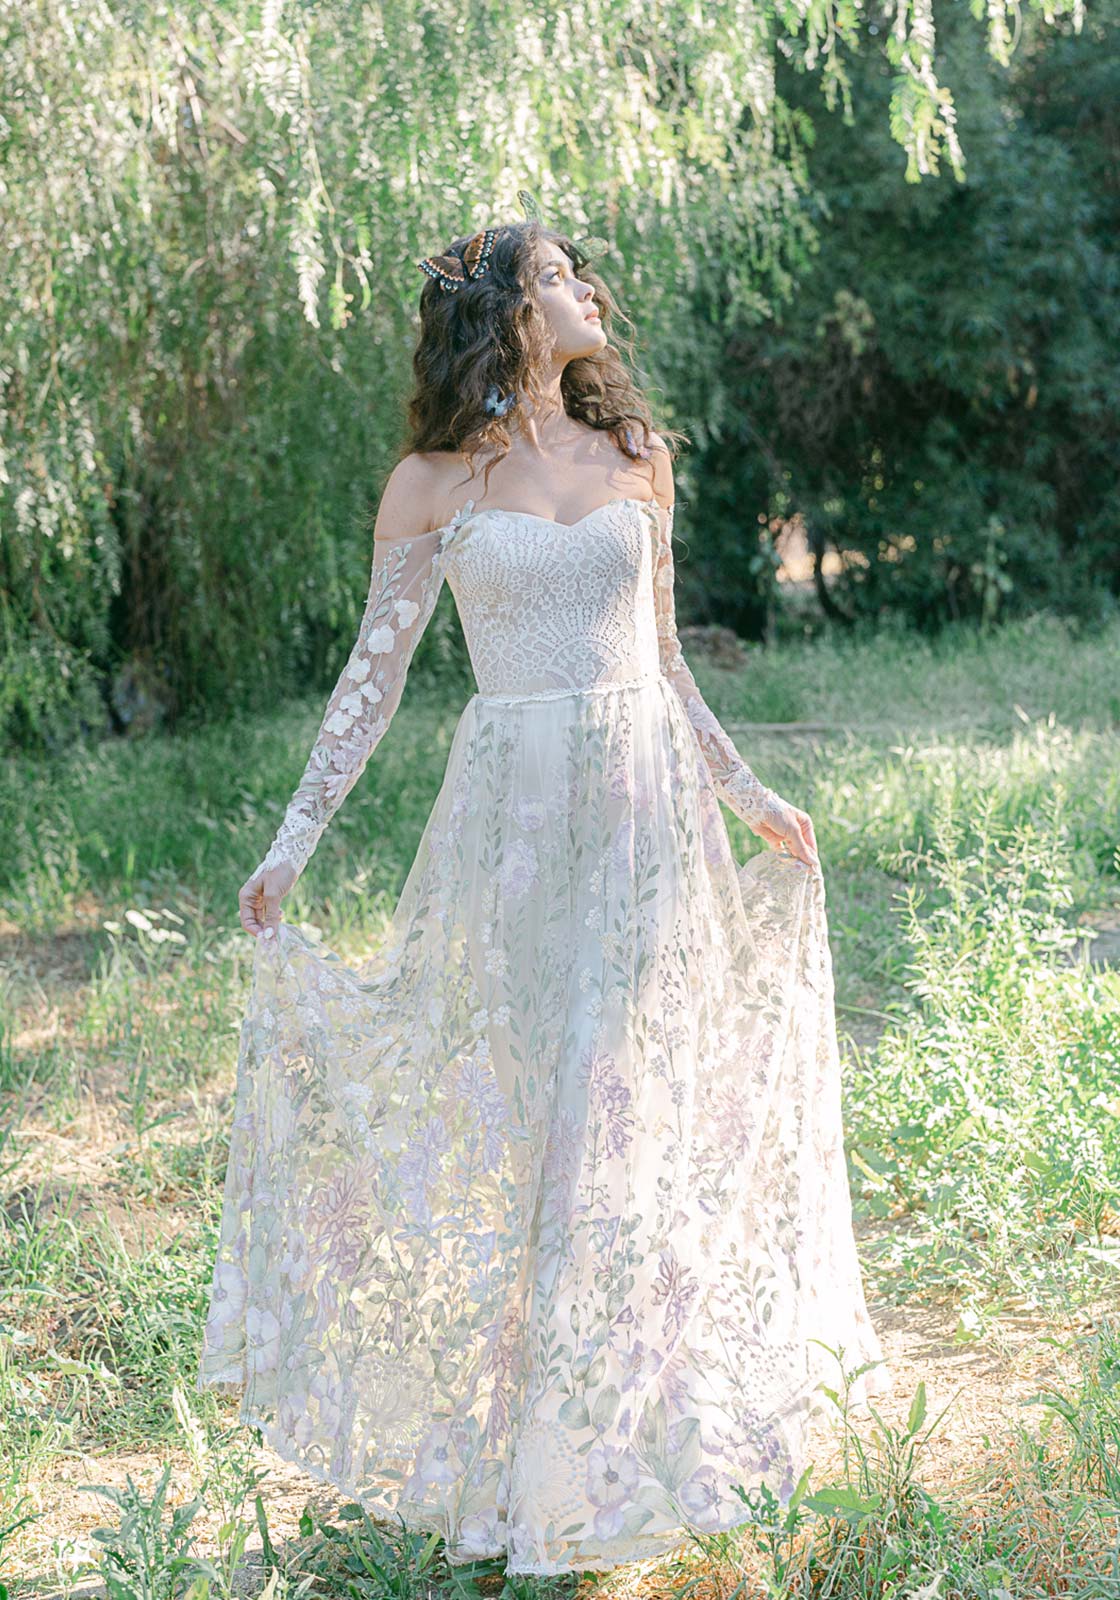 Meadowsweet Lace Wedding Dress with Floral Embroidery by Claire Pettibone